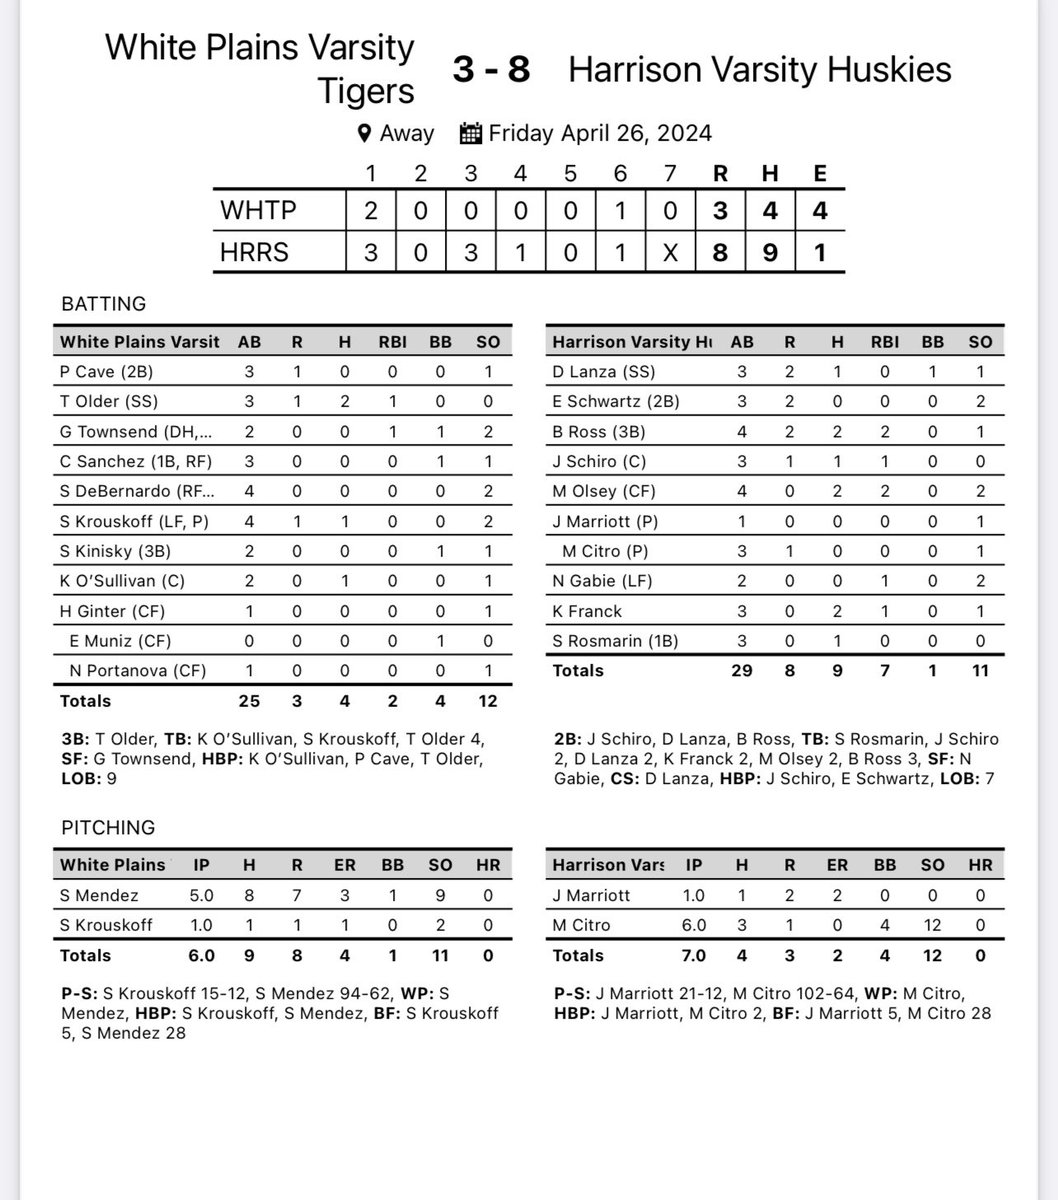 Tough 8-3 loss vs a strong offensive Harrison team. The boys battled but a few key defensive mistakes and runners left on base in multiple innings were the deciding factors. We are back at it tomorrow in the Consolation Game at 11am vs Valhalla.